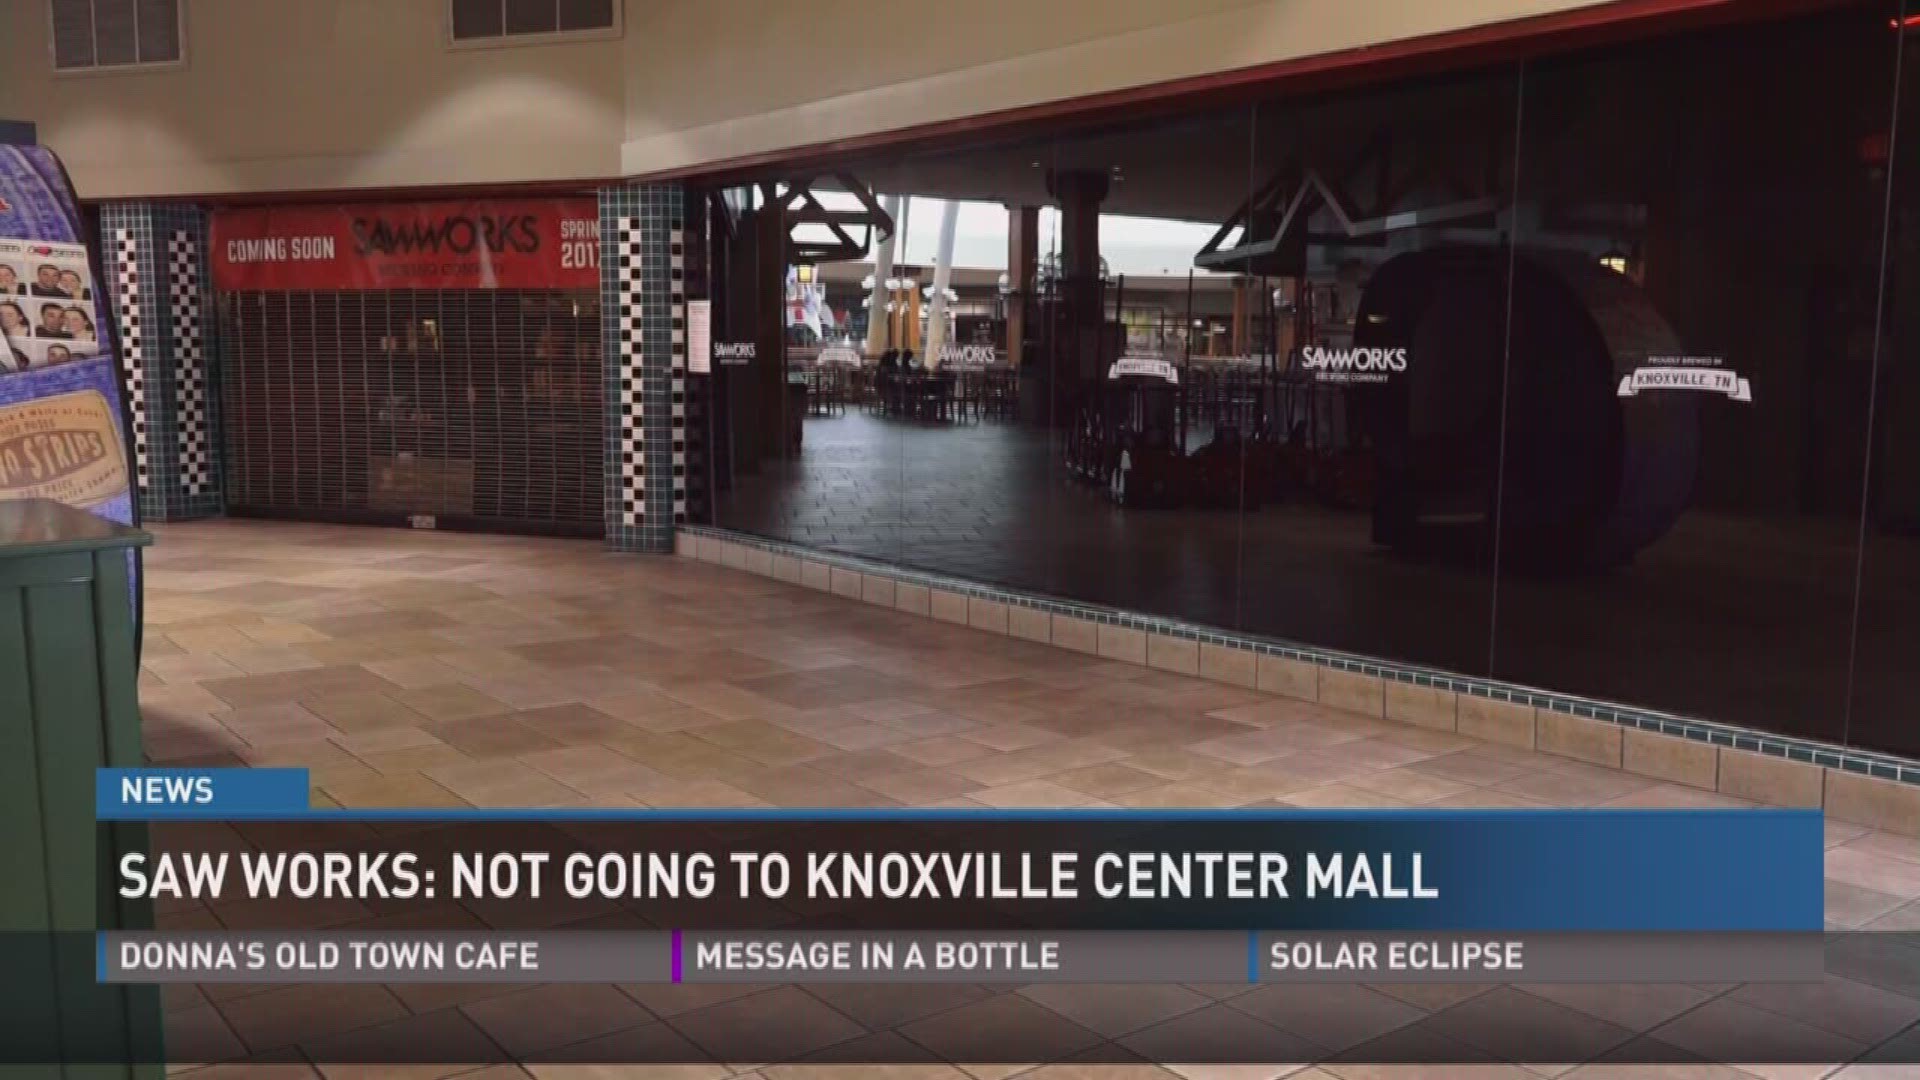 July 21, 2017: The founder of Saw Works Brewing says they will not open a tasting room inside Knoxville Center Mall, but mall owners say the plans are still moving forward.